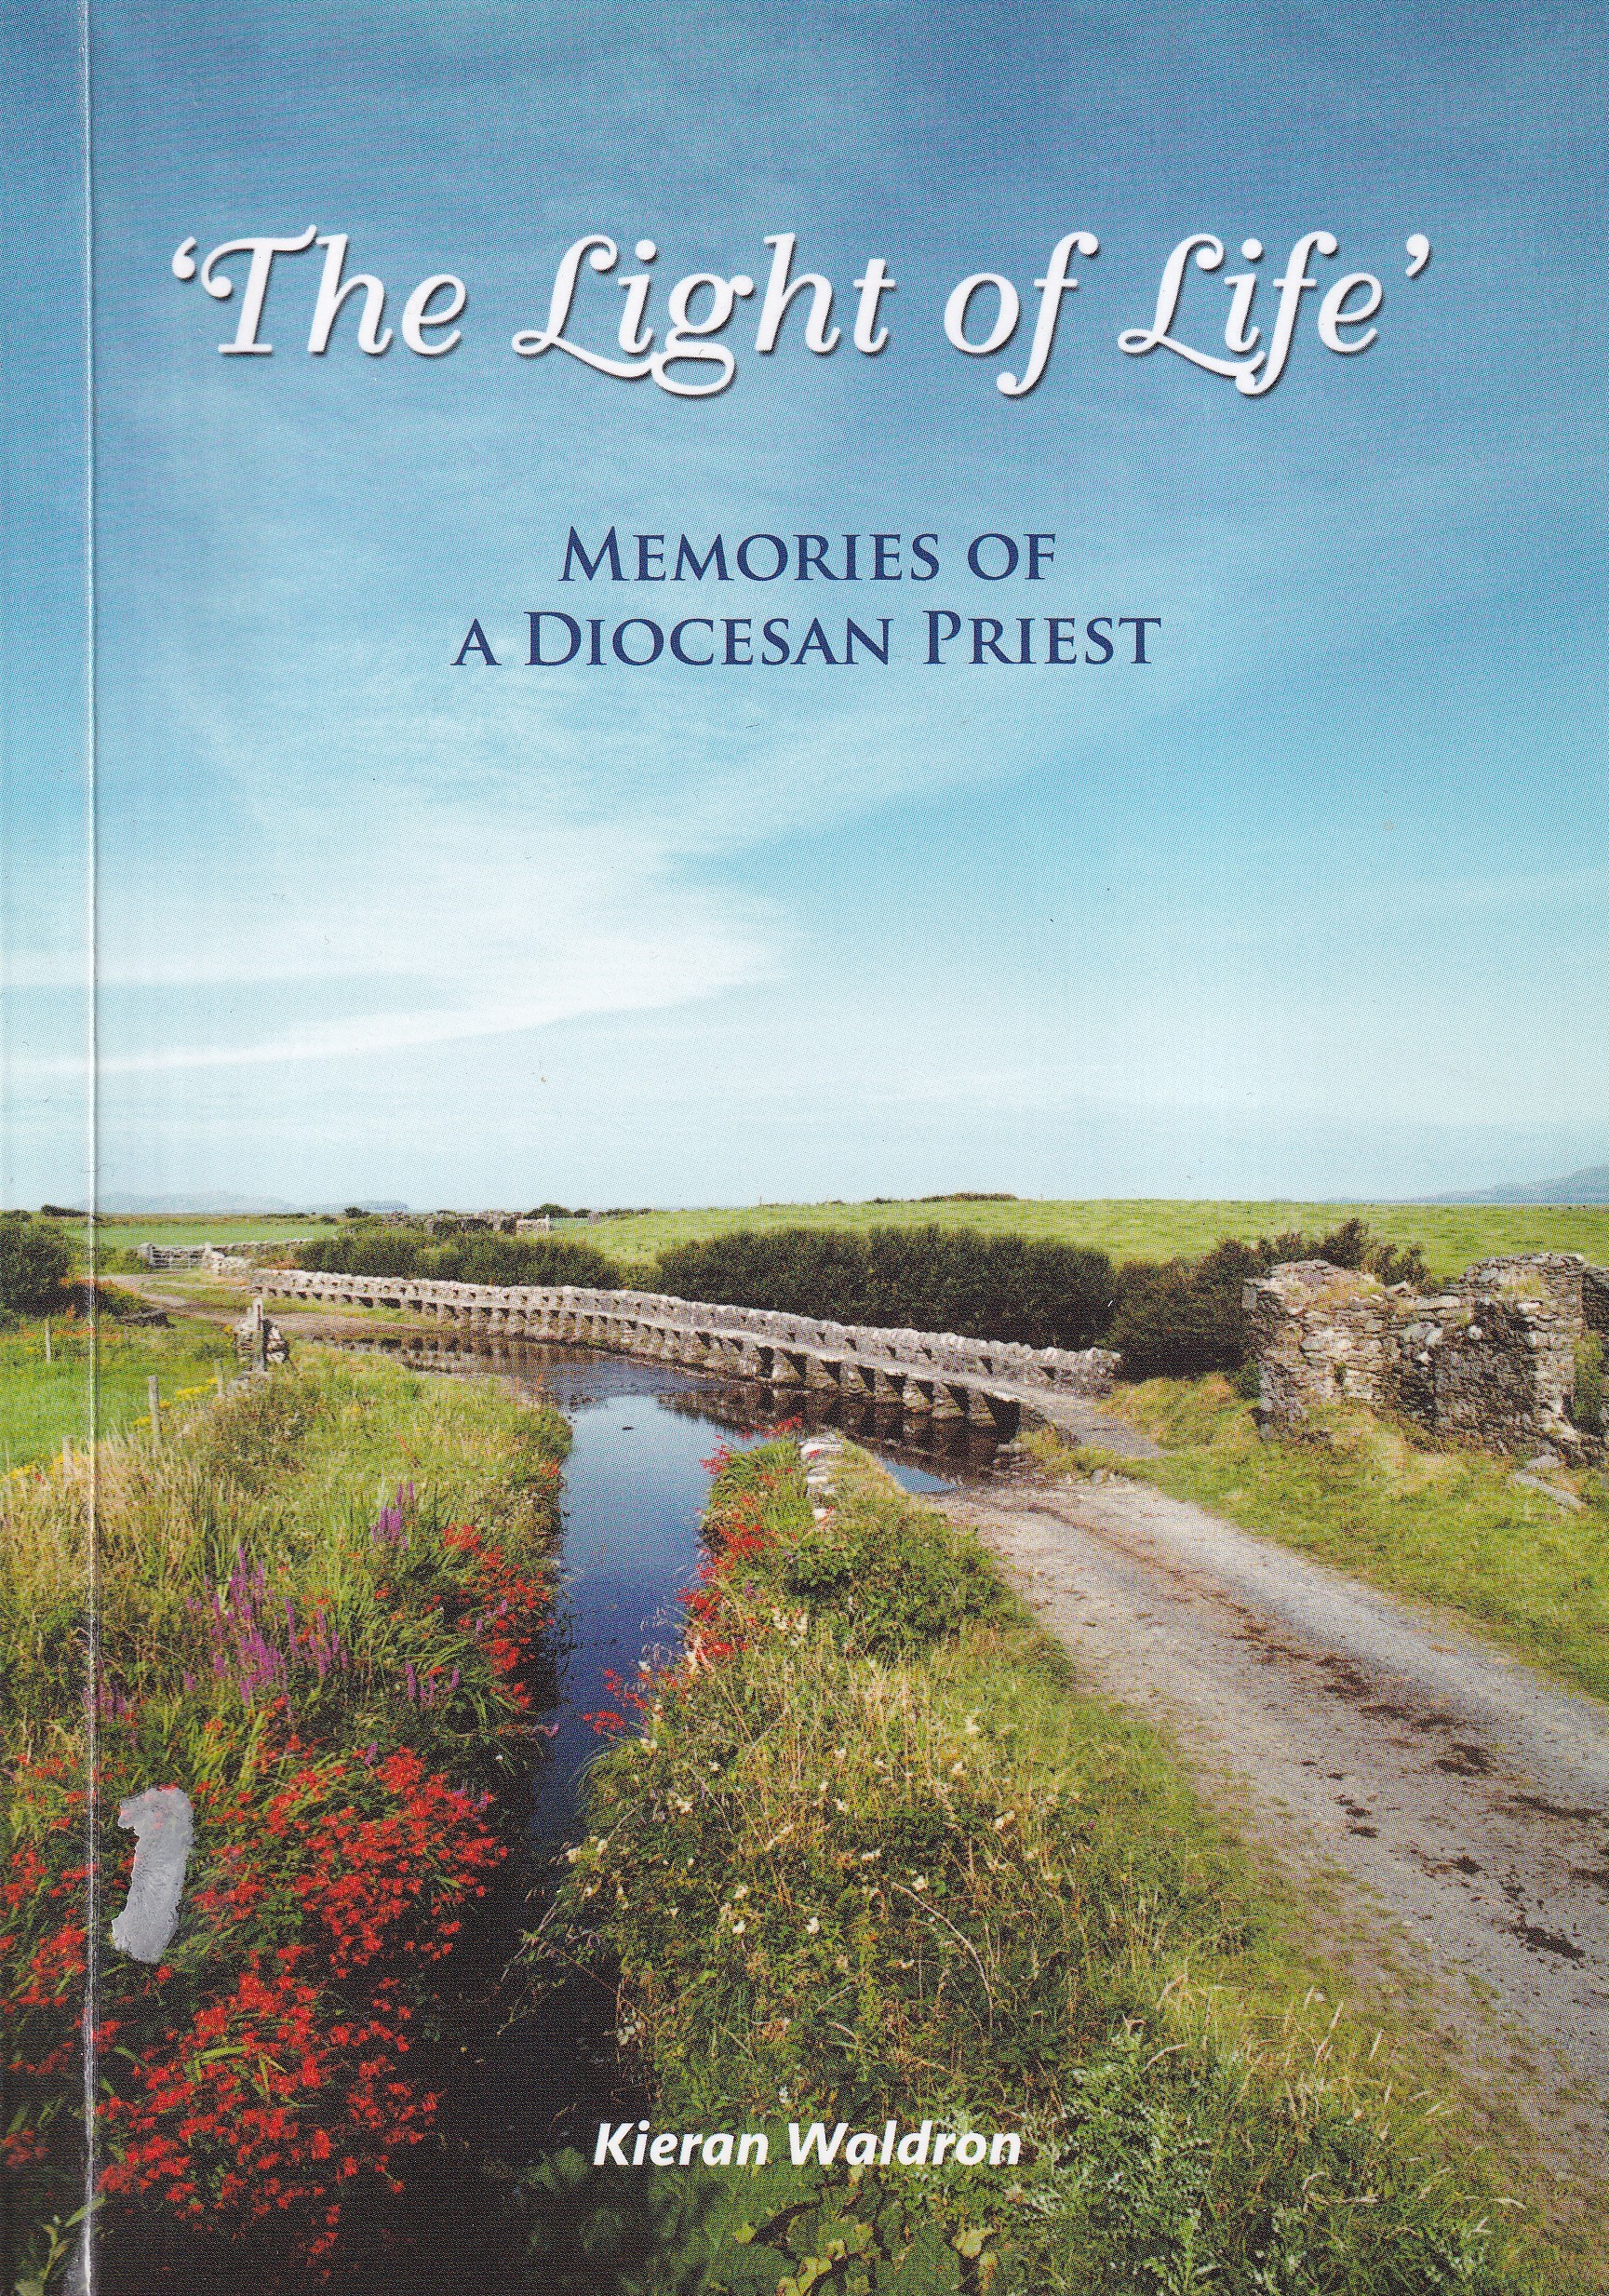 The Light of Life: Memories of a Diocesan Priest | Kieran Waldron | Charlie Byrne's